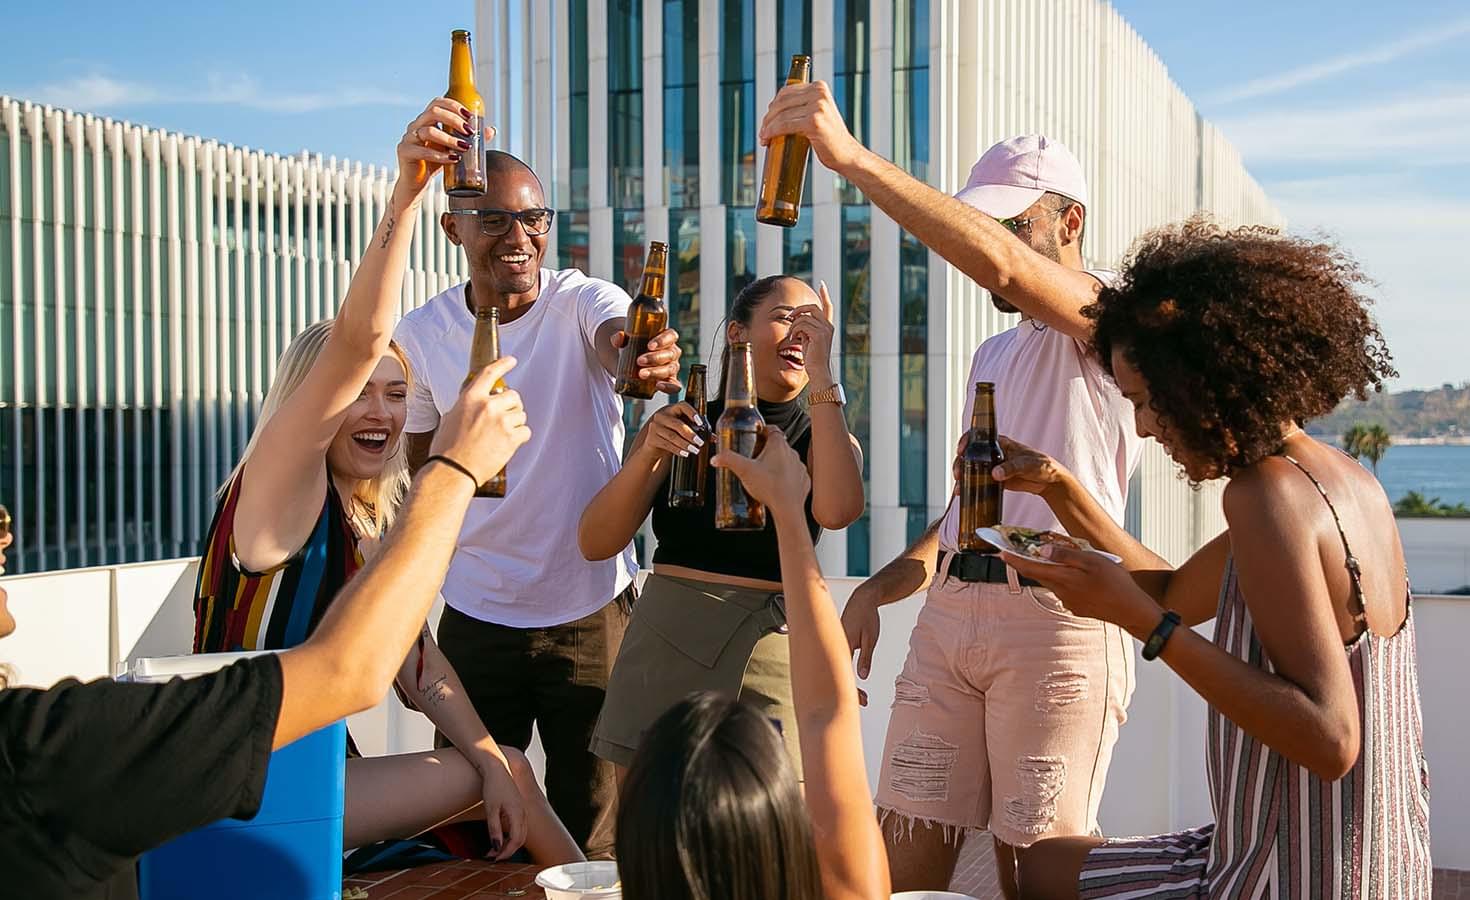 Group of friends celebrating and toasting with beer bottles